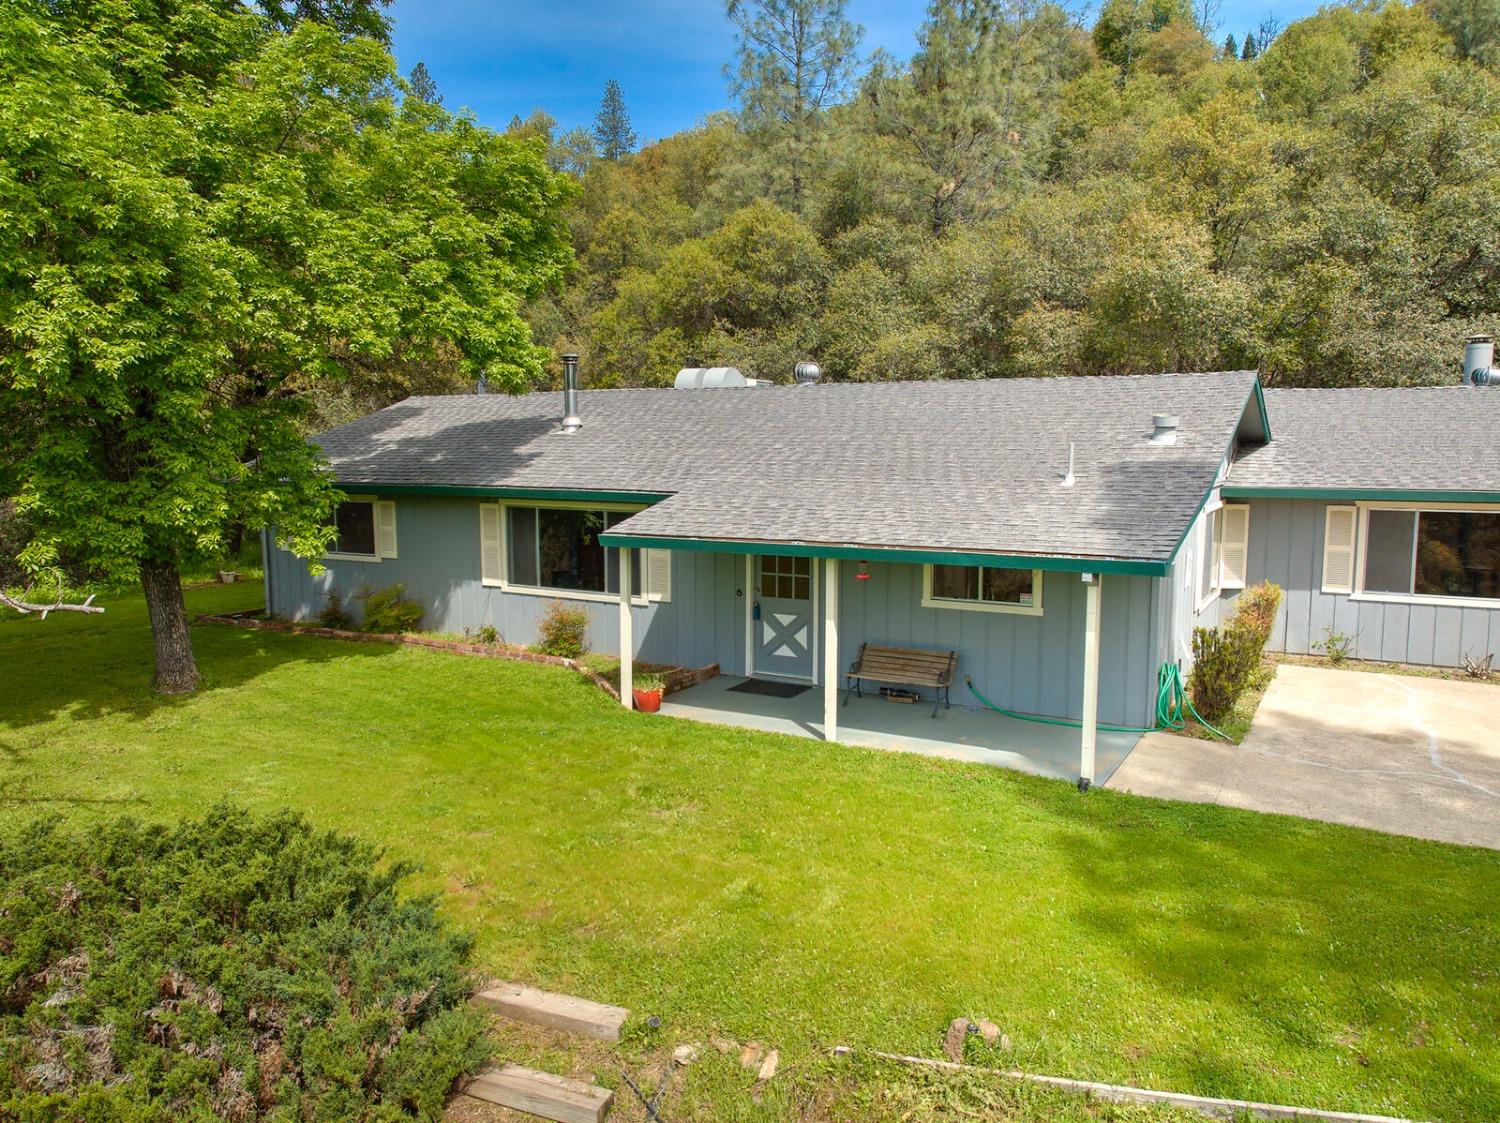 This charming 1820sf ranch-style home on 3.49 acres in beautiful Placerville is minutes from Main St and Hwy 50 but gives you the space and beauty of a rural property and is only 2 mins from Lions Park. Ample parking for cars and toys. Multiple outbuildings include a 2-car garage, chicken coop, and garden shed. Past the fenced backyard is a trail among the trees that presents a natural, almost-hidden waterfall and huge rock boulders. From the front porch, look across the grassy yard to an open meadow below and while outside you can enjoy watching the planes from the  Placerville airport nearby. Touches of vintage charm throughout the home include detailed, artistic diagonal wood-paneling in the front living room, where the wood stove can provide alternative heat to this cozy room and beyond. The spacious family room past the kitchen is perfect for using as a big game room, children's playroom, spacious light-filled office or whatever your imagination can bring. Enjoy the convenience of an indoor laundry room off of the kitchen. Some of the original amenities like the kitchen cabinets have been maintained by the seller through the years to remain in good function and condition. This is a great home that allows for some buyer touches to make it your own and increase your equity.